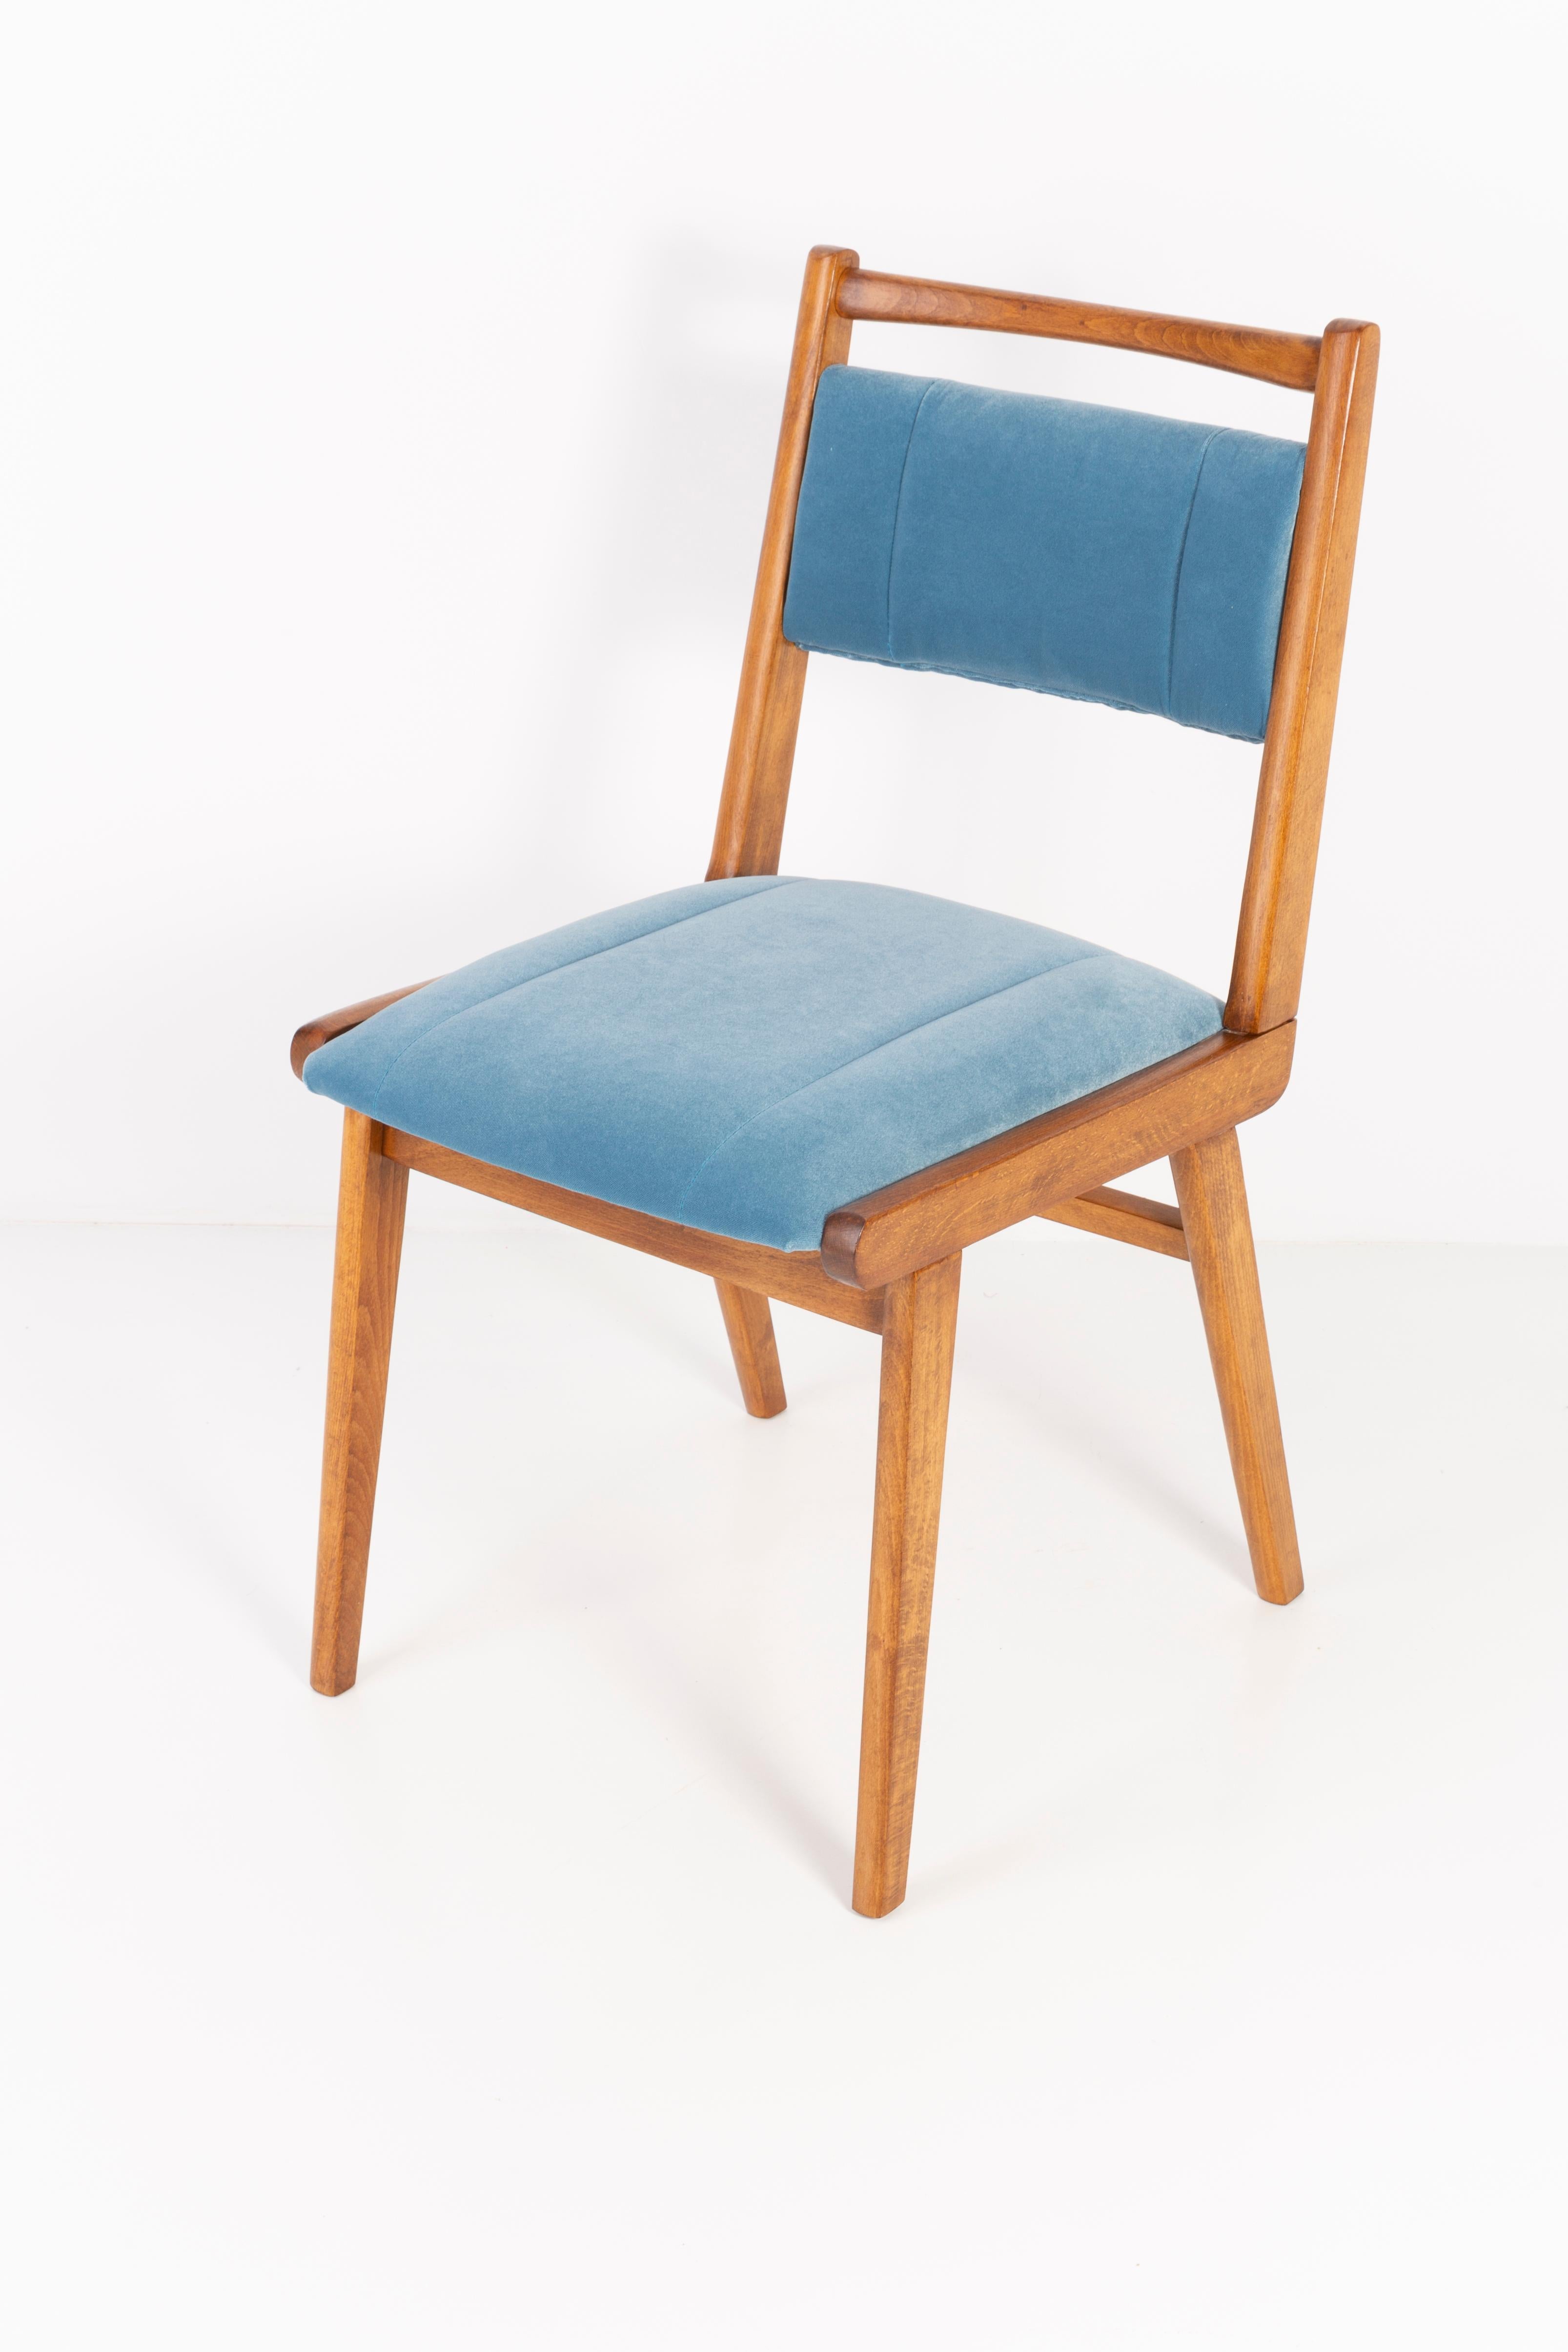 Hand-Crafted Mid Century Baby Blue Velvet Vintage Chair, Europe, 1960s For Sale